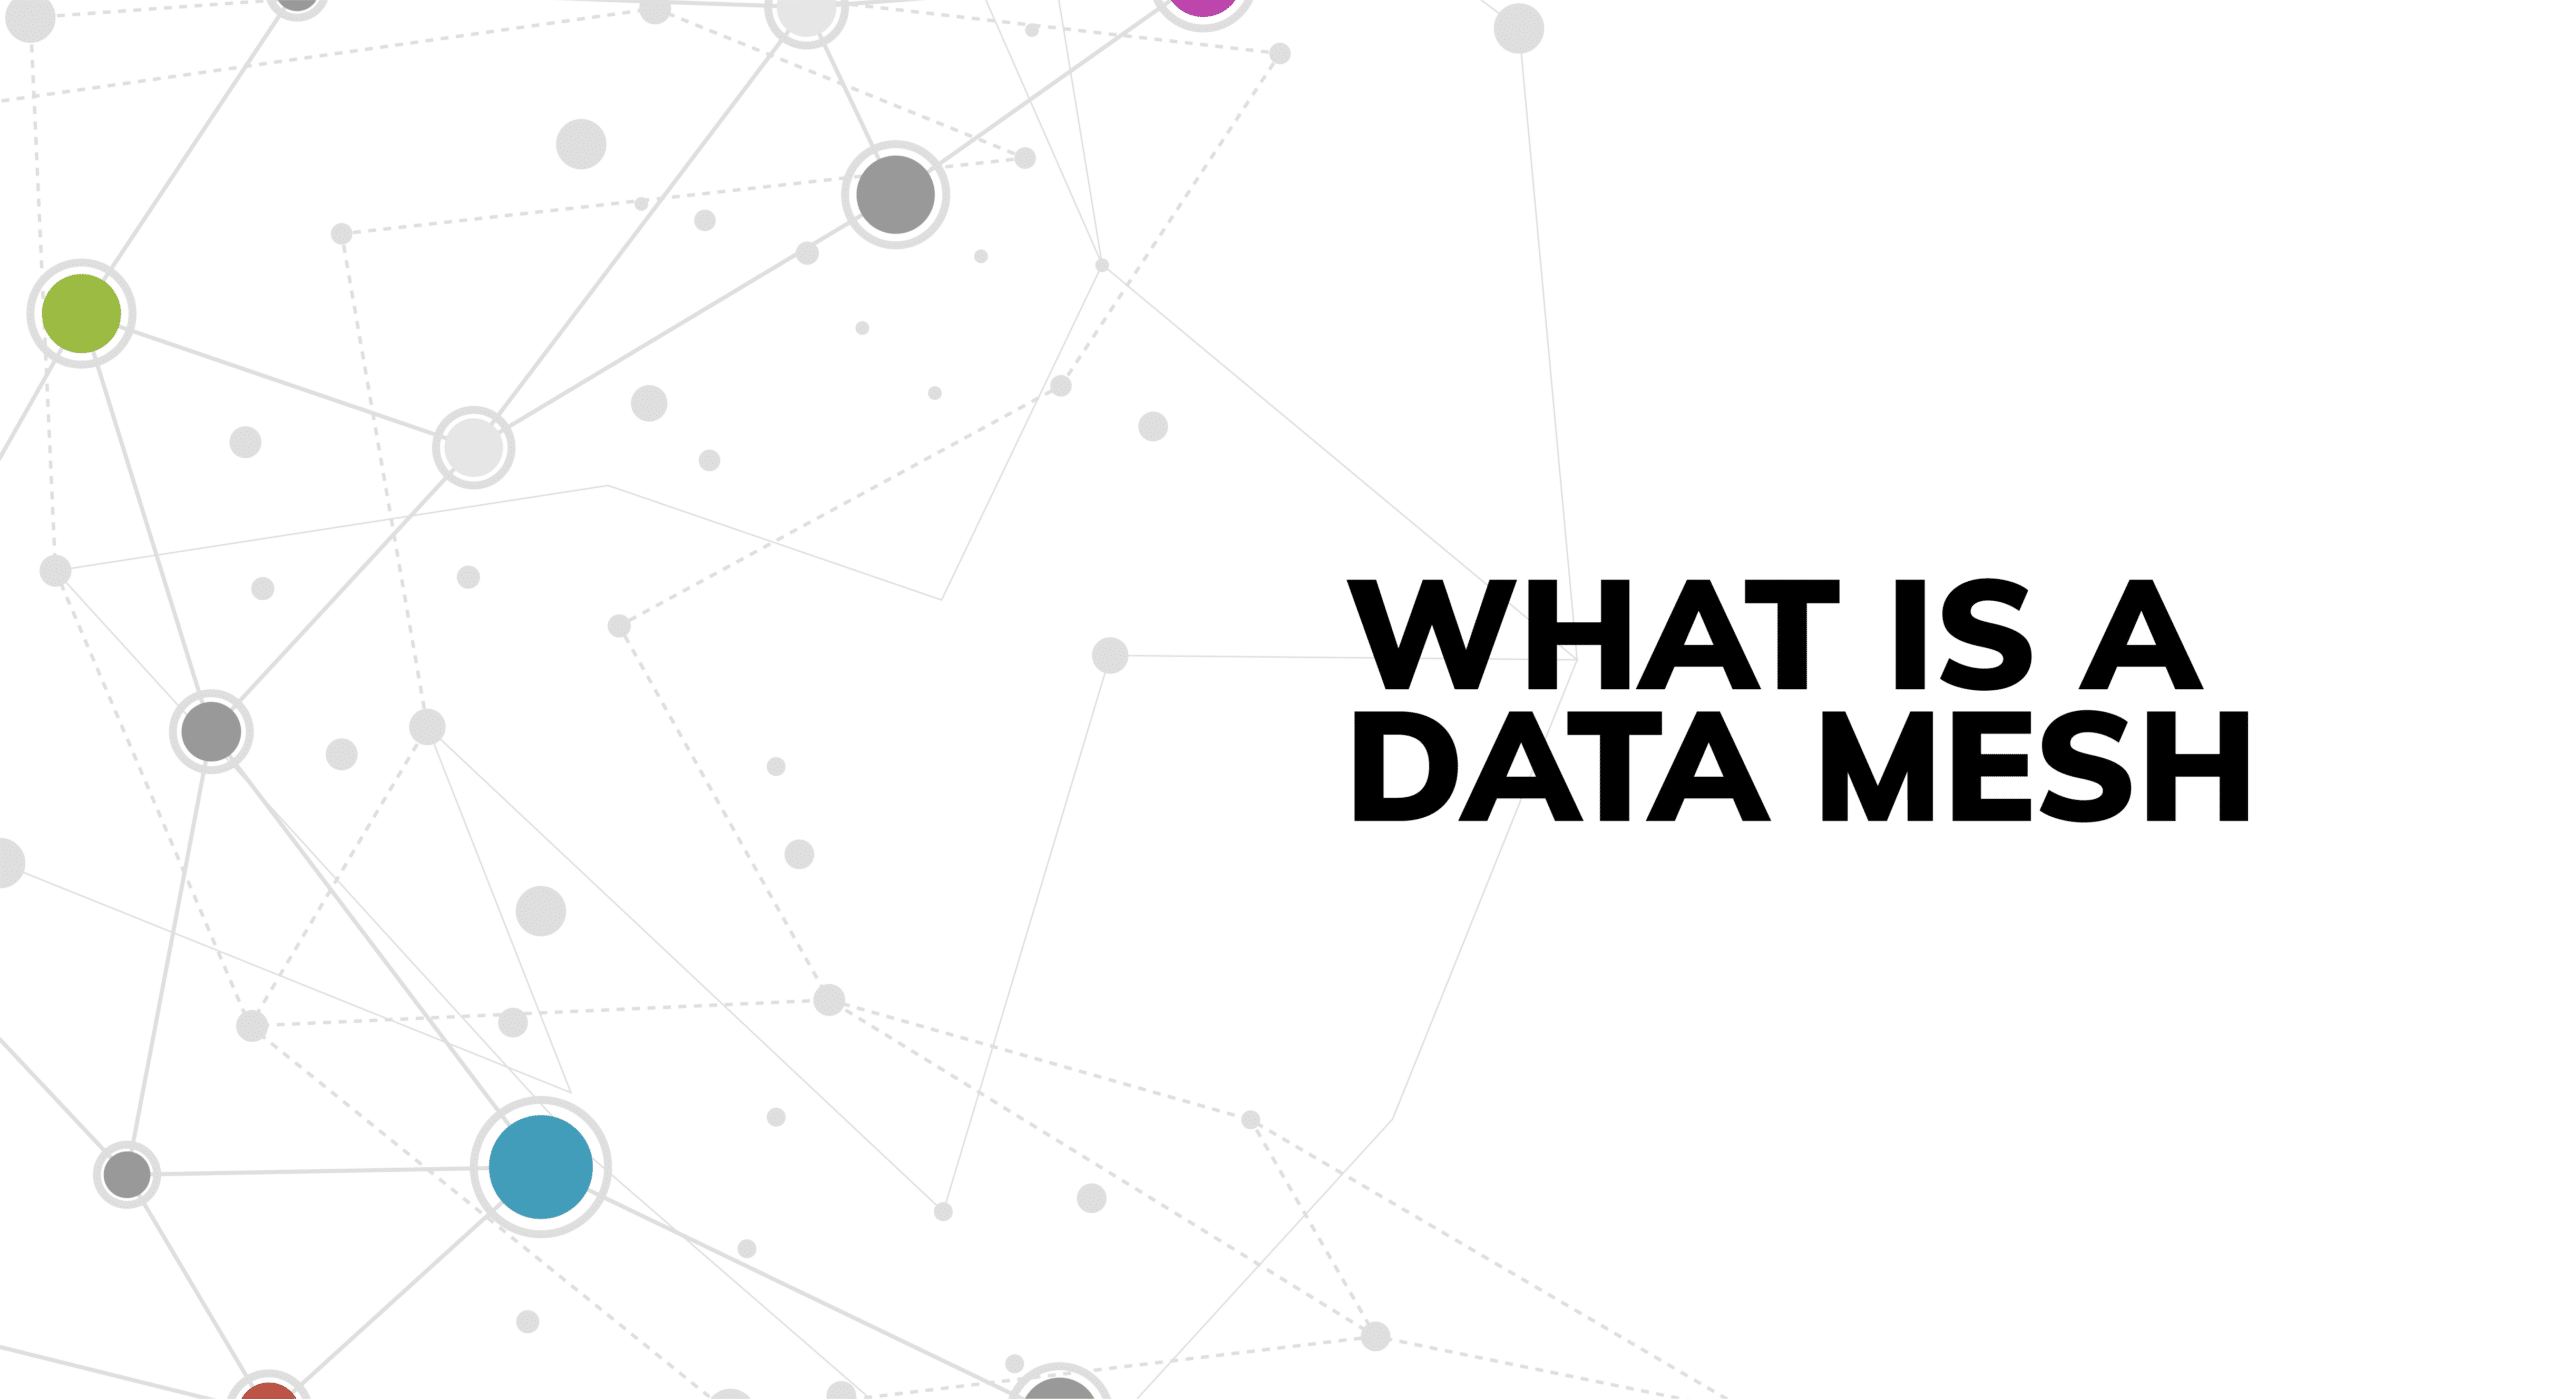 What is a Data Mesh?